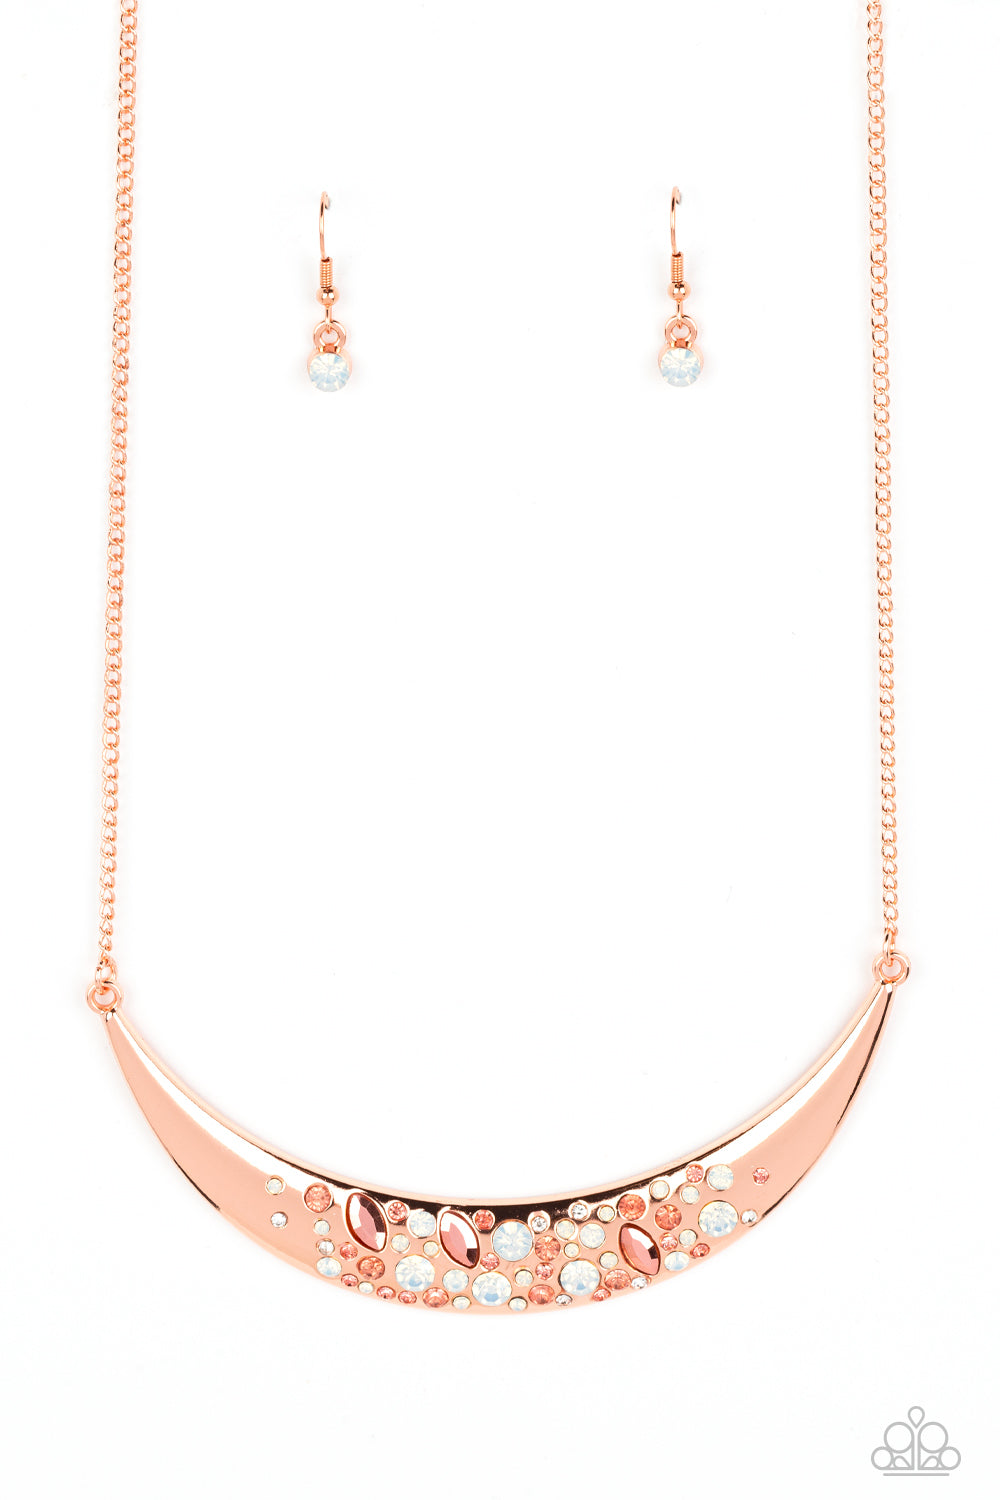 Bejeweled Baroness - Copper Necklace